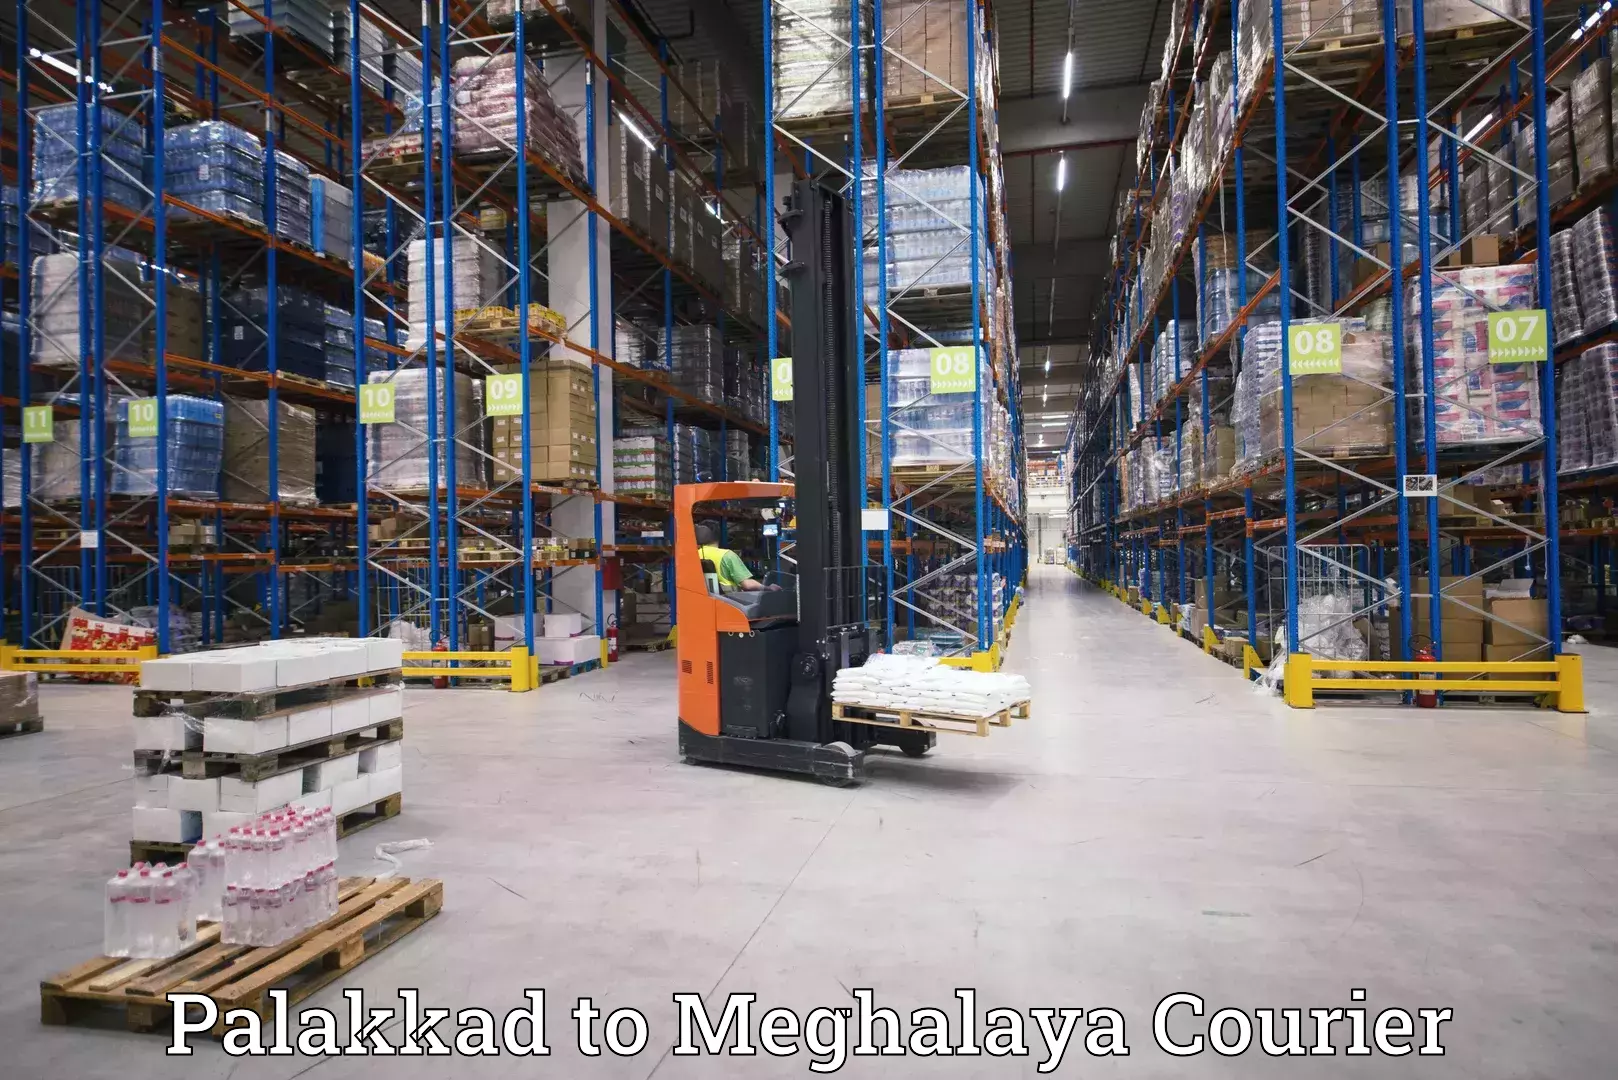 State-of-the-art courier technology Palakkad to Garobadha